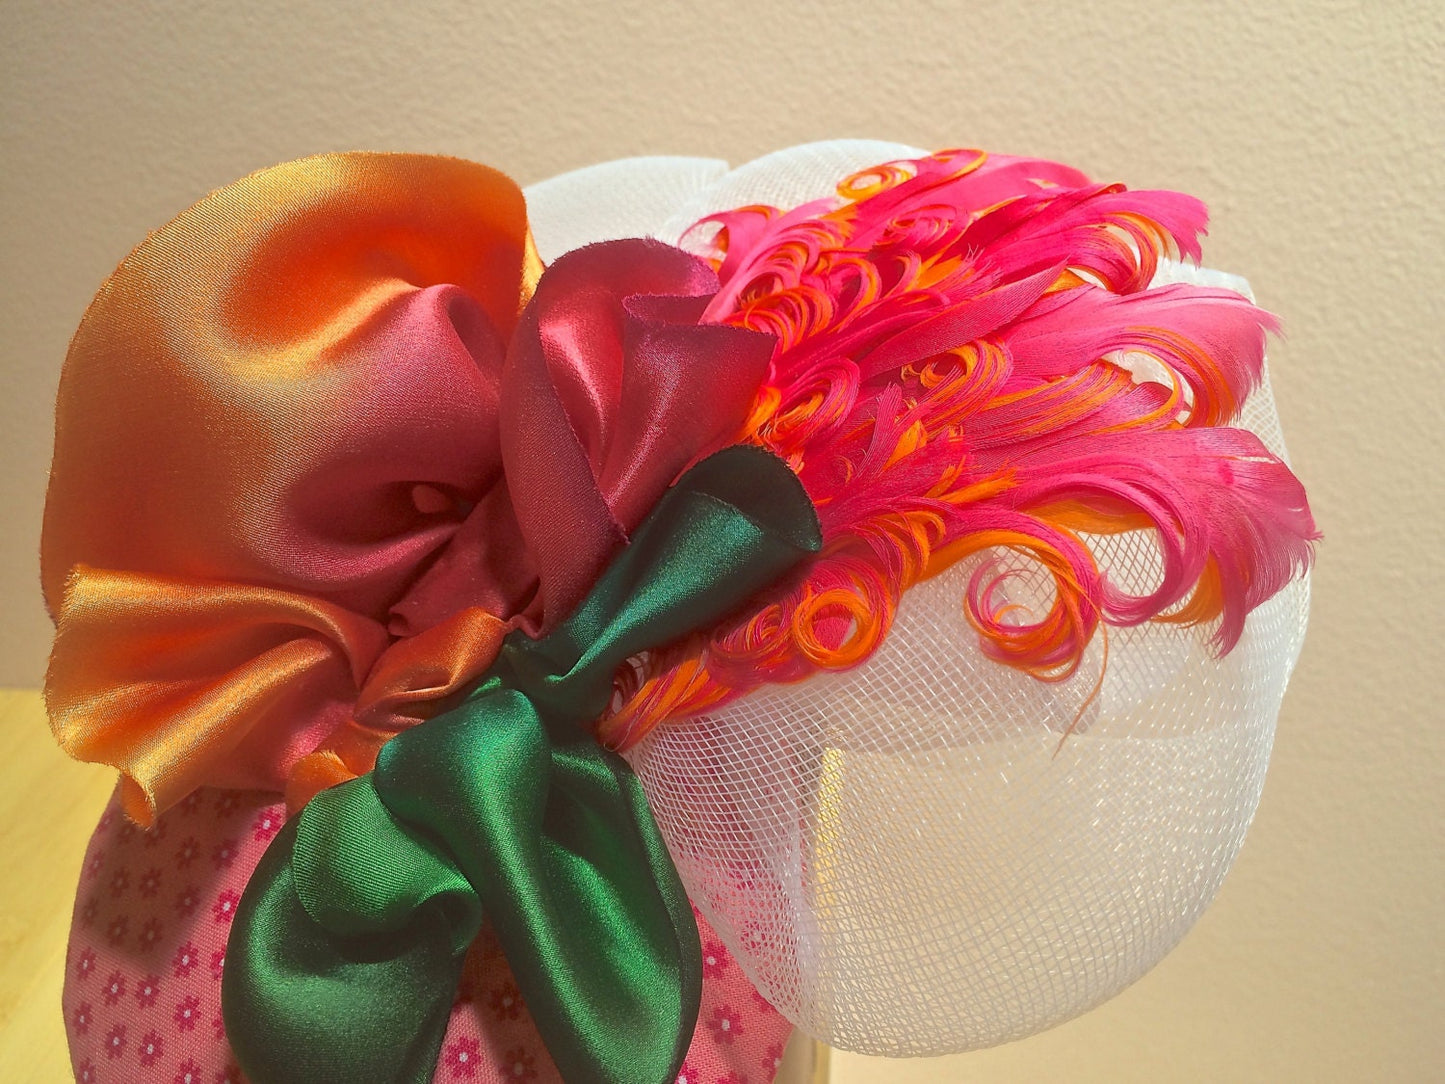 Colorful Pink fascinator, Yellow and Green and White Fascinator, Brides maids headpiece-Destination wedding-Cocktail party-Summer party hat